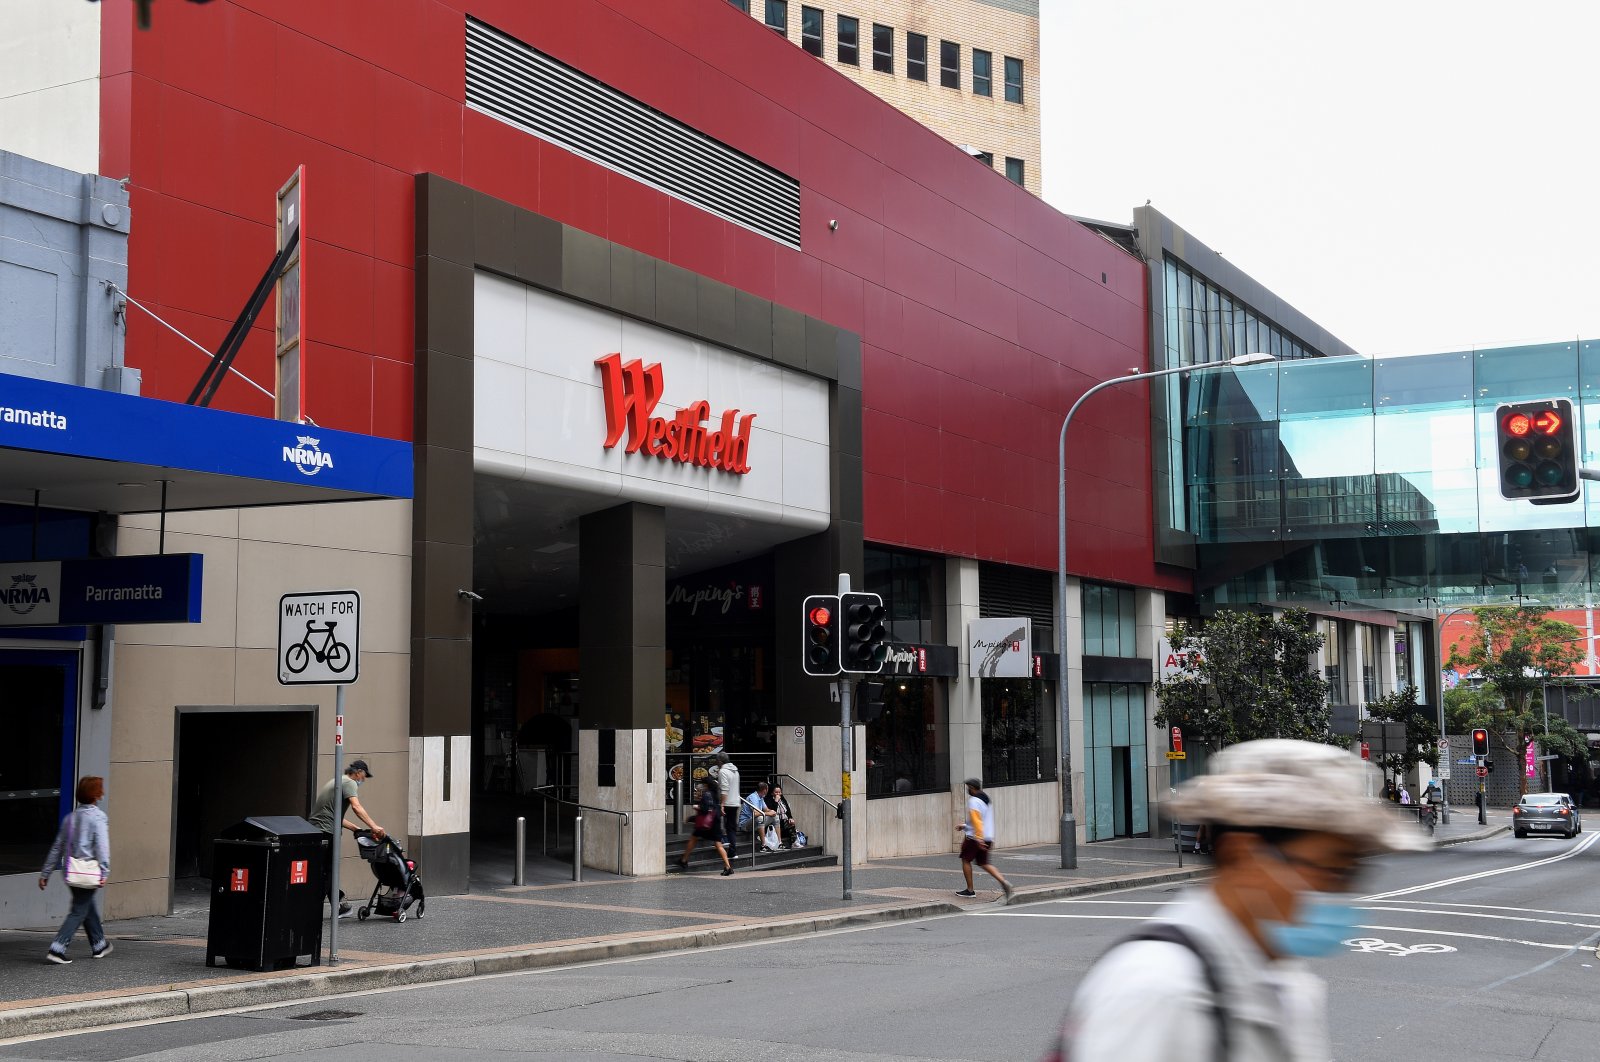 General view of Westfield Parramatta, where five stores have been deemed exposure sites for the Omicron variant of COVID-19, in Sydney, New South Wales, Australia, Dec. 1, 2021. (EPA Photo)